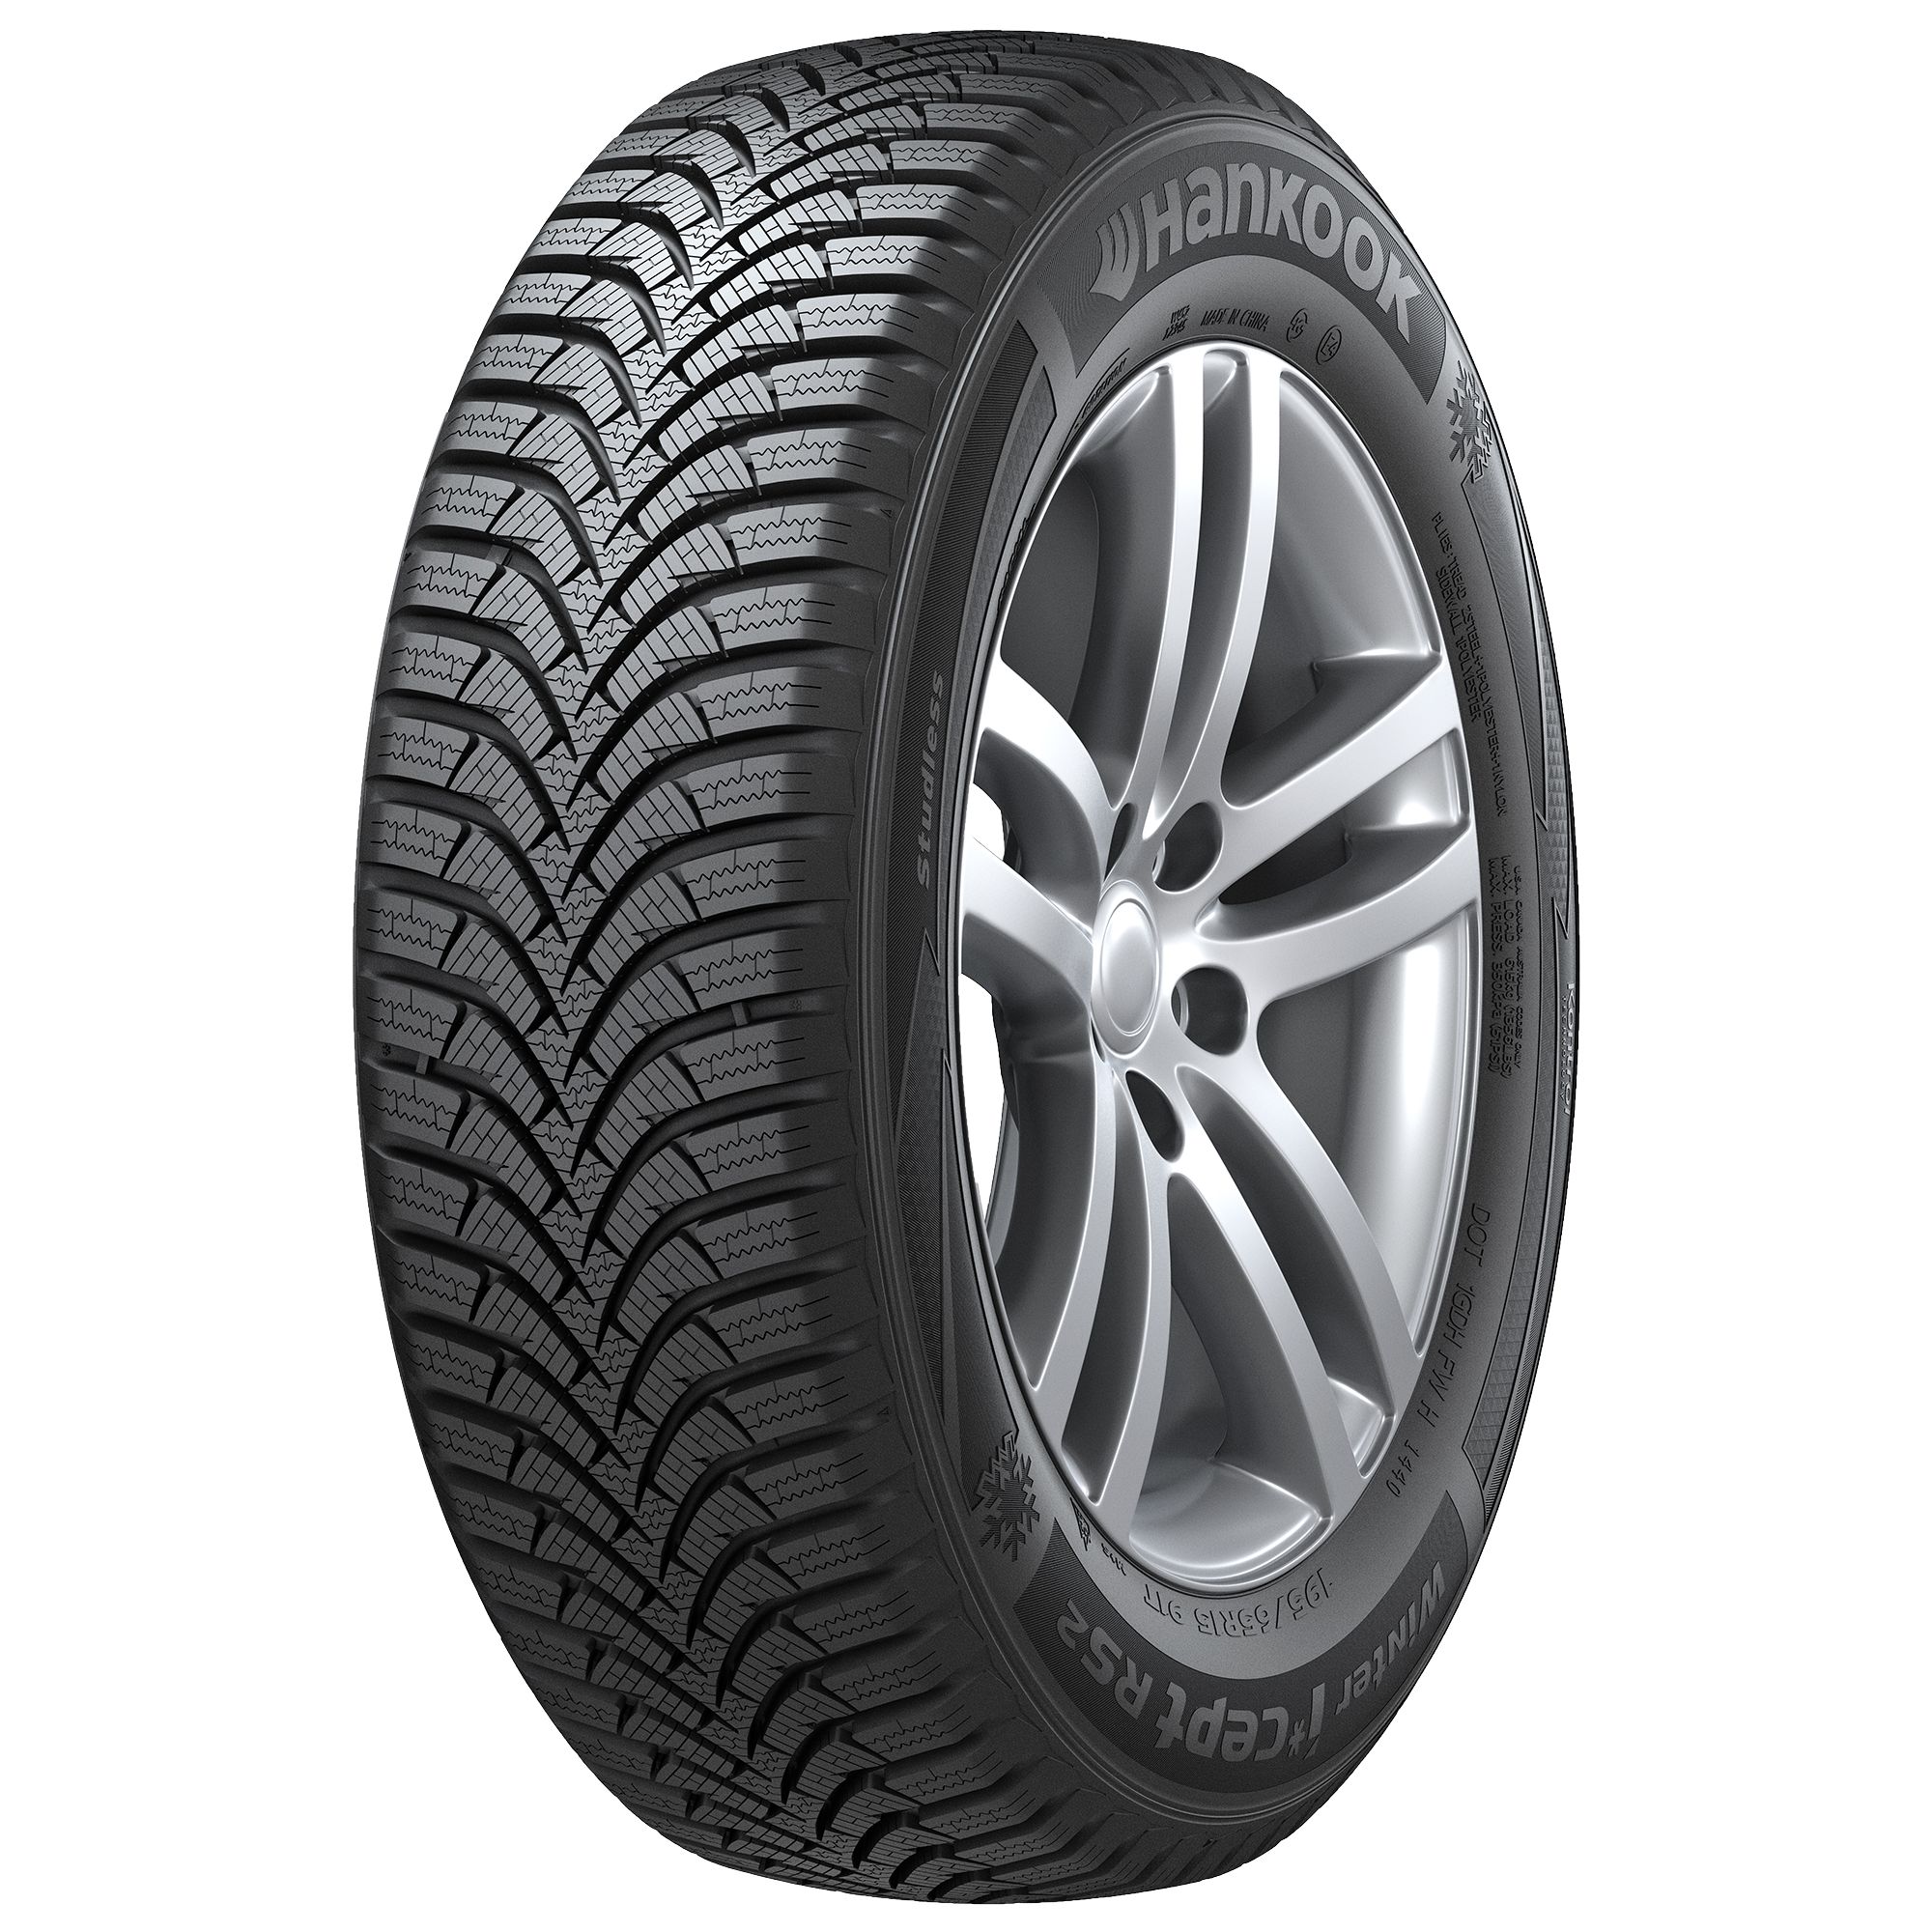 HANKOOK WINTER I*CEPT RS2 (W452) 225/45R17 91H BSW